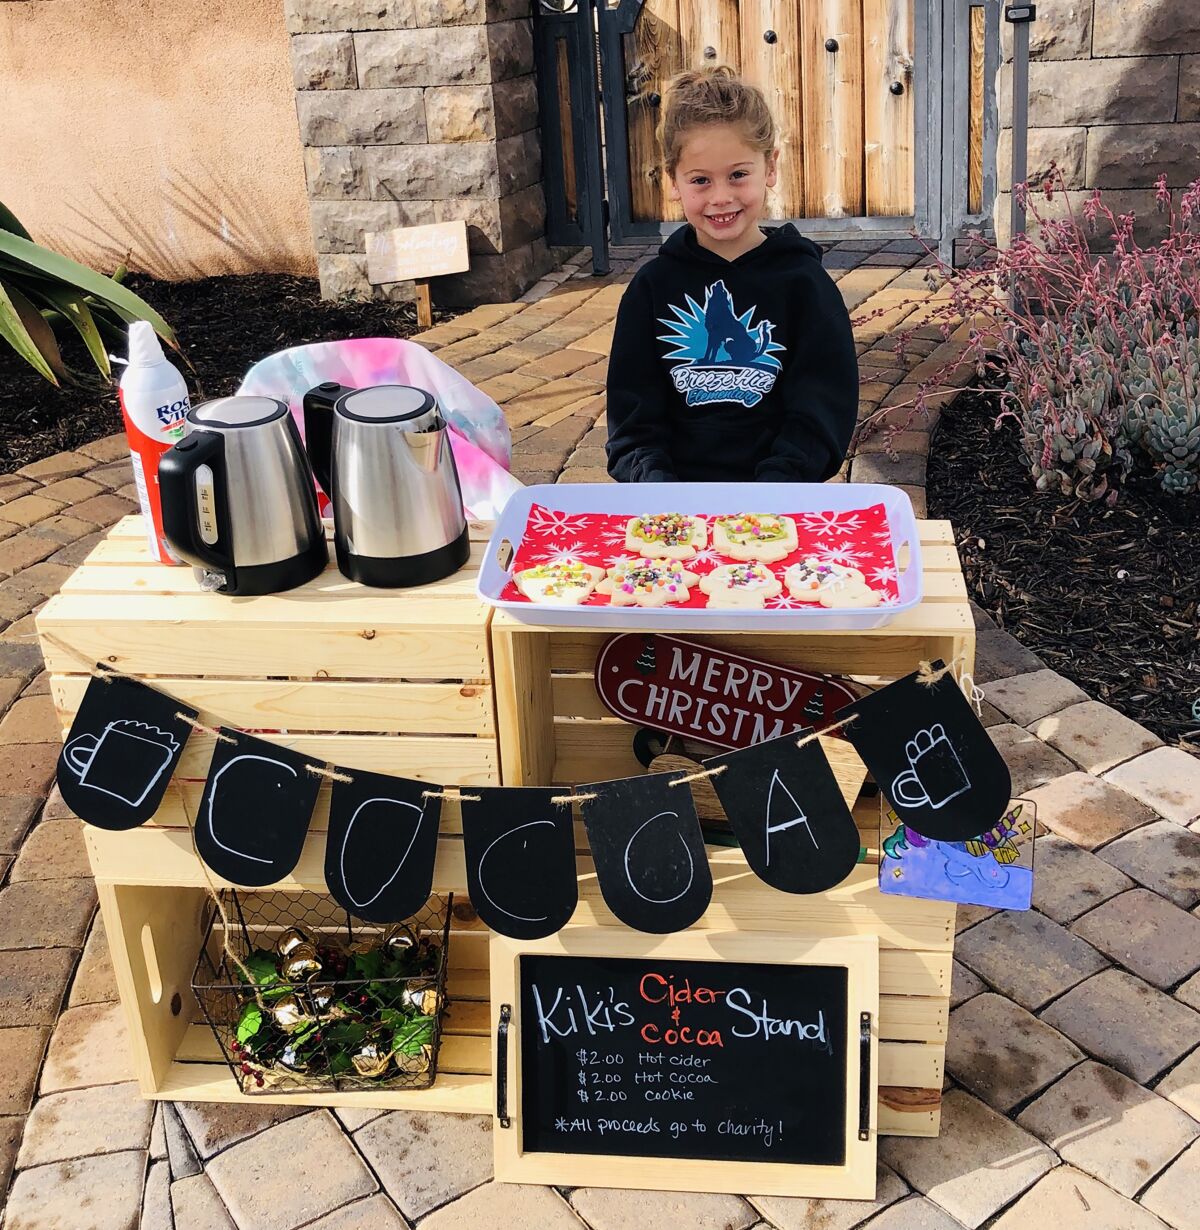 Katelynn Hardee, a kindergartnener at Breeze Hill Elementary in Vista. Katelynn held a hot cocoa and cookie stand and raised funds to pay off negative lunch balances for classmates.